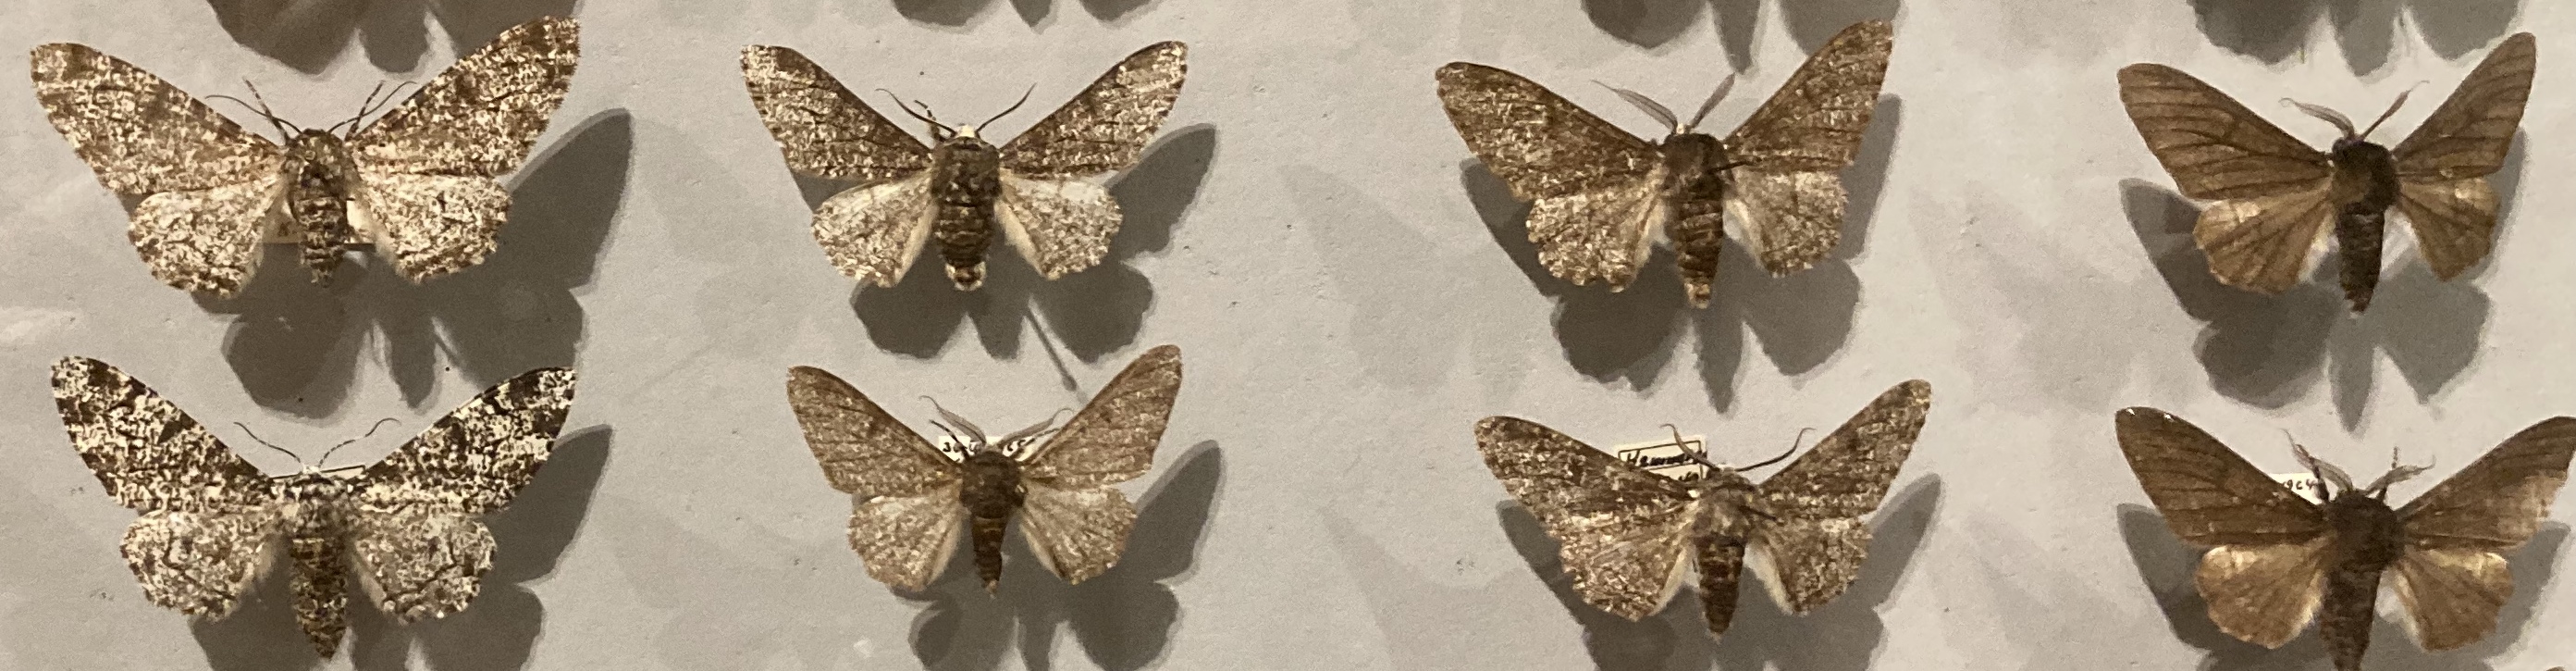 Examples of the color variation of the peppered moth.